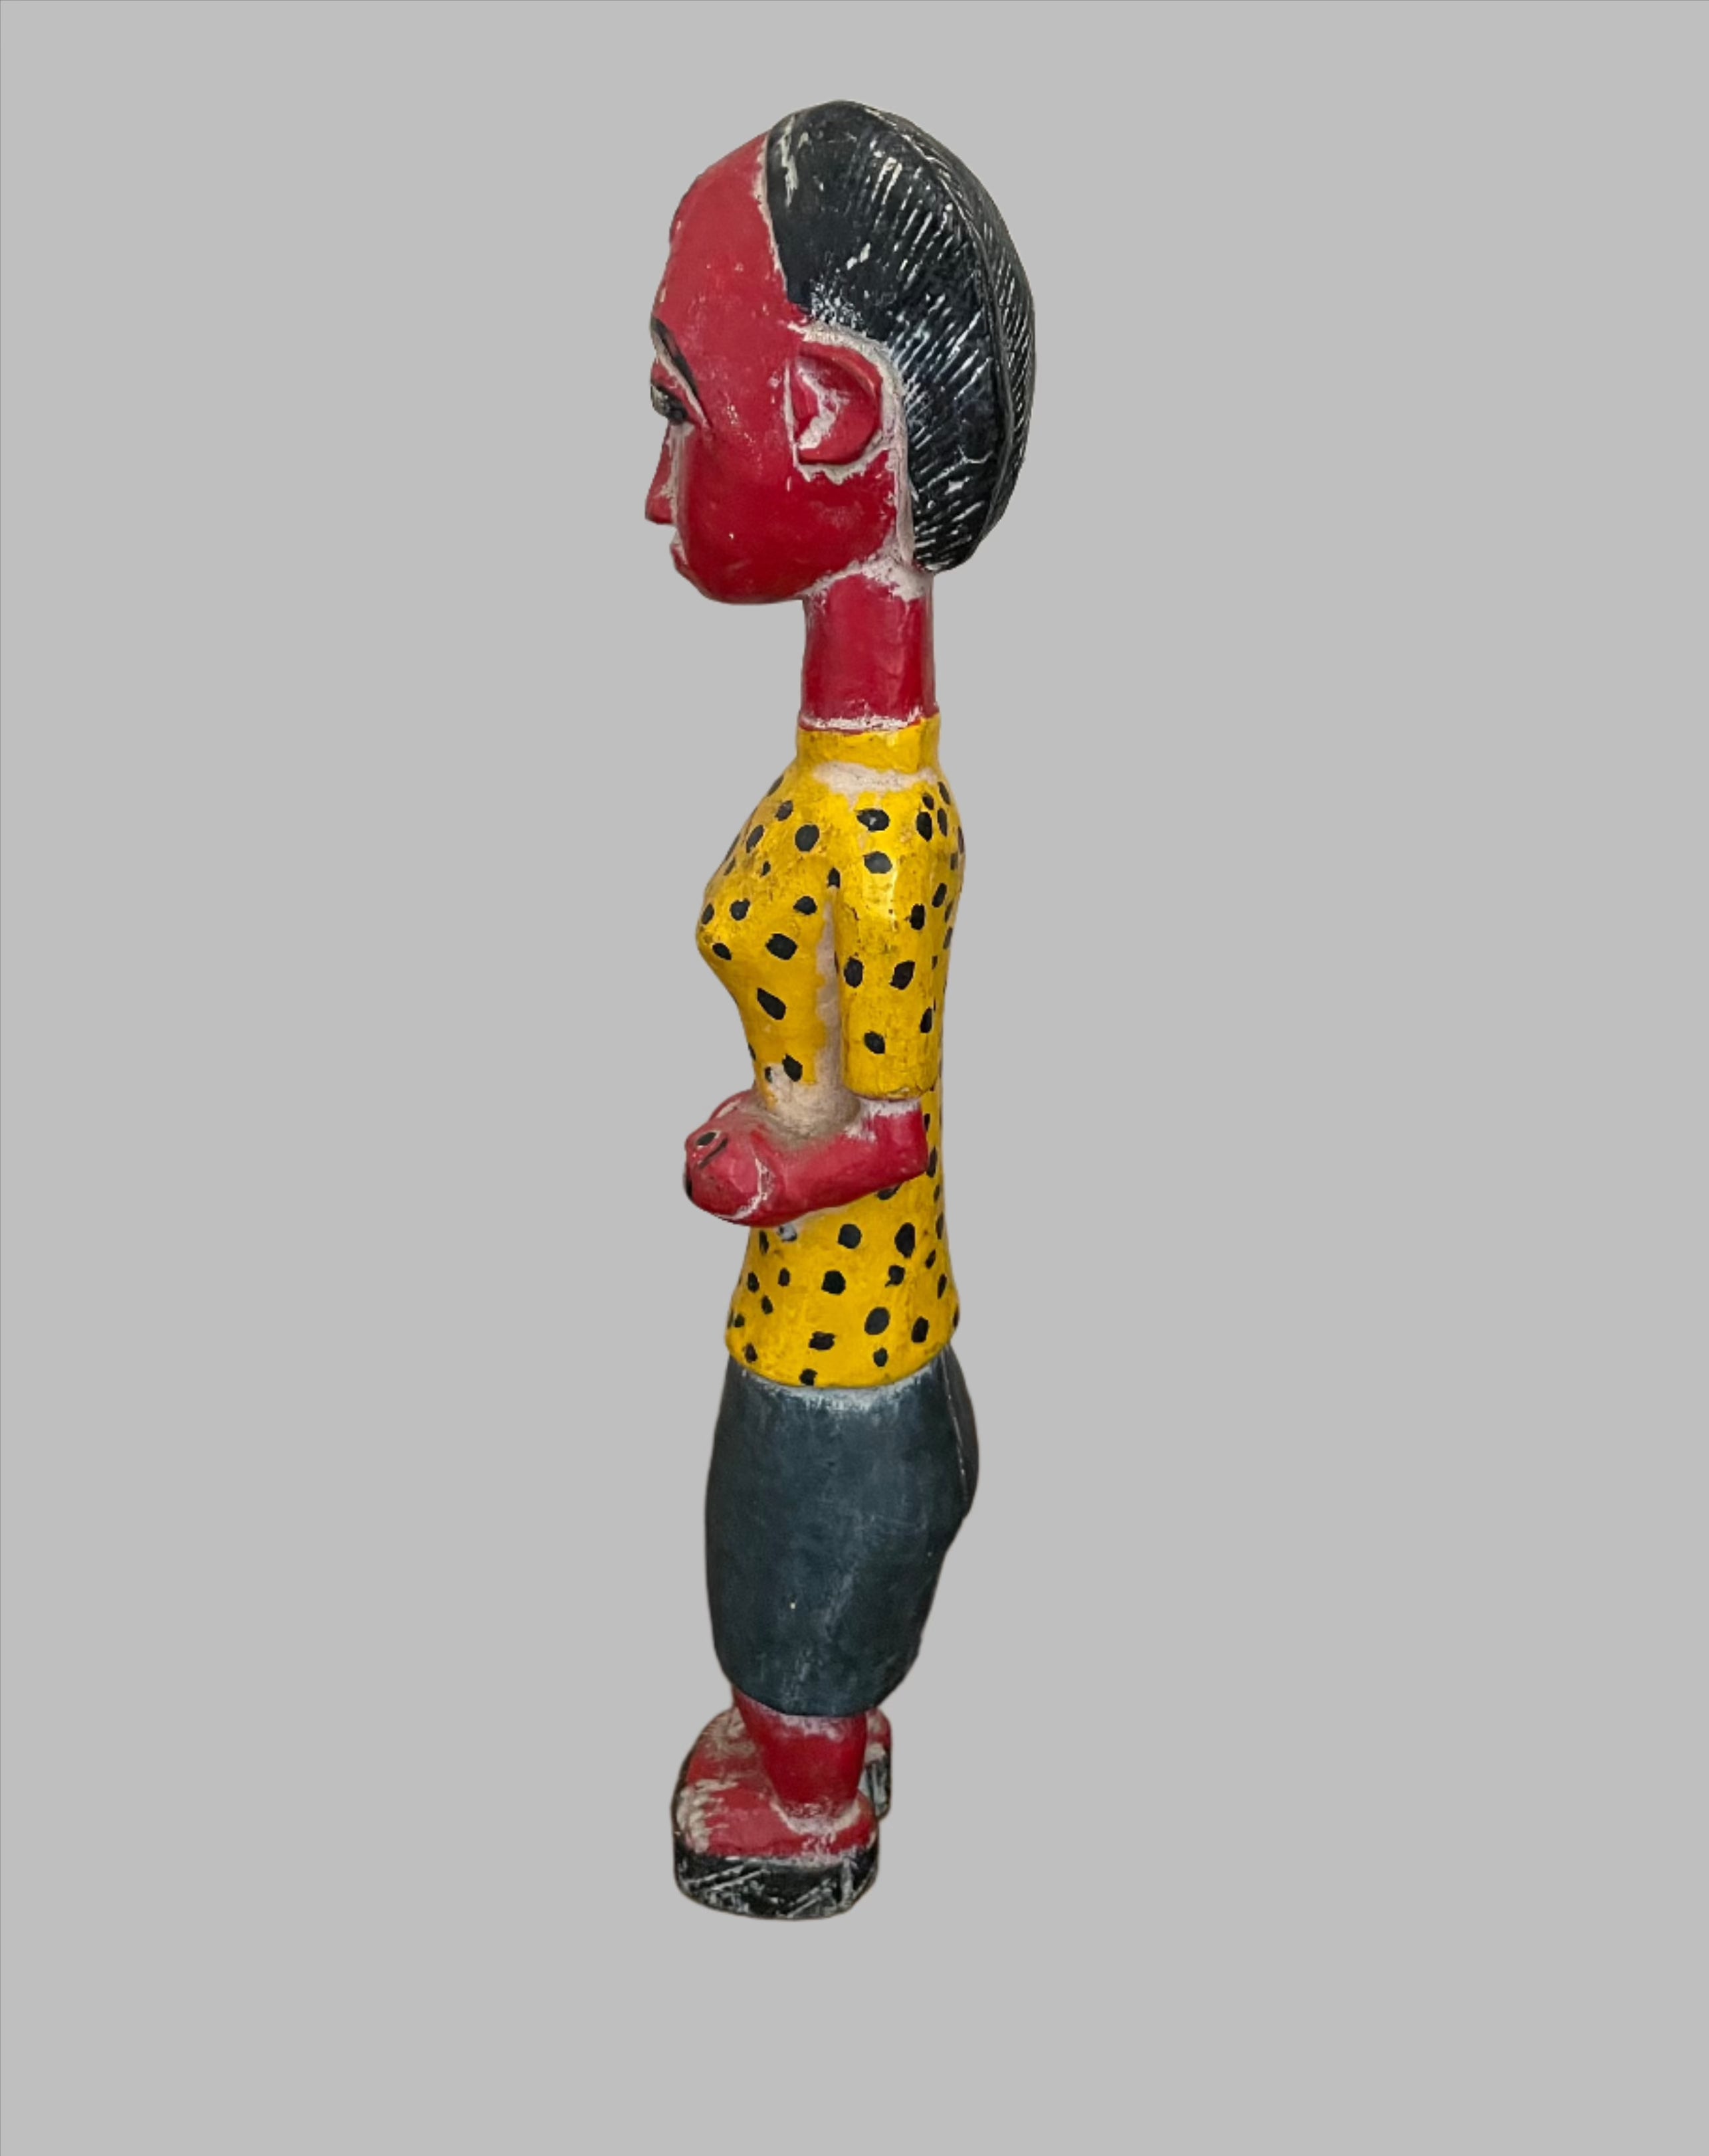 Handcrafted Sculptures - African Art - Wood Carving - Statuettes - Vintage - Home Decor - Hand Painted, Vintage African Baule Maternity Statue, Crafted Art, Carved Wood